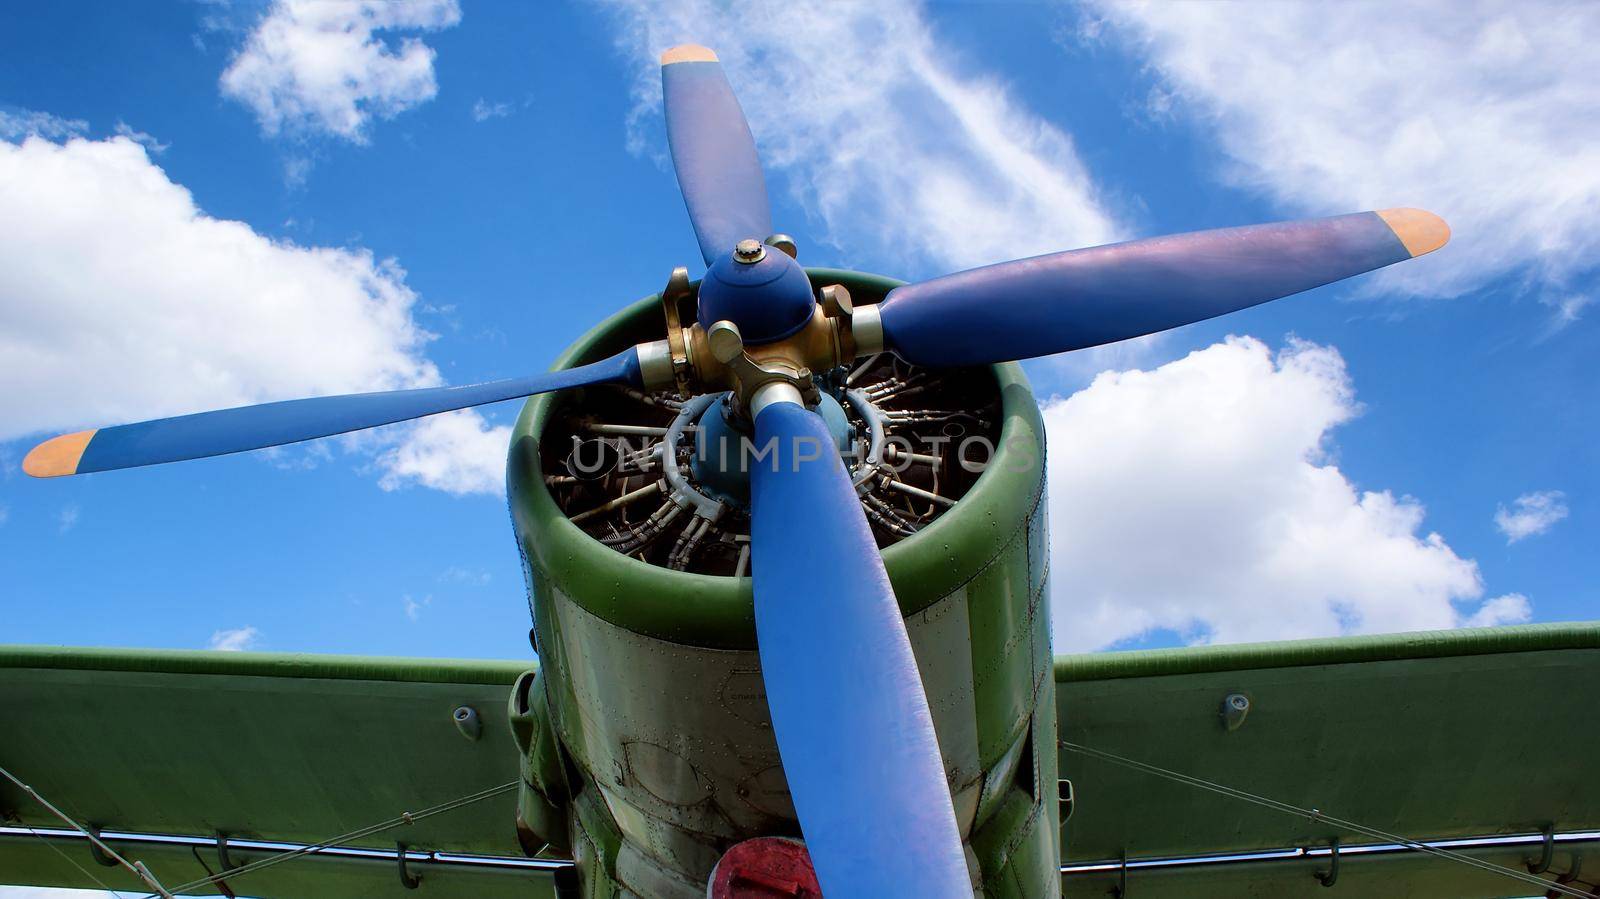 The engine of the screw plane of an old aircraft. Blades of blue retro style.